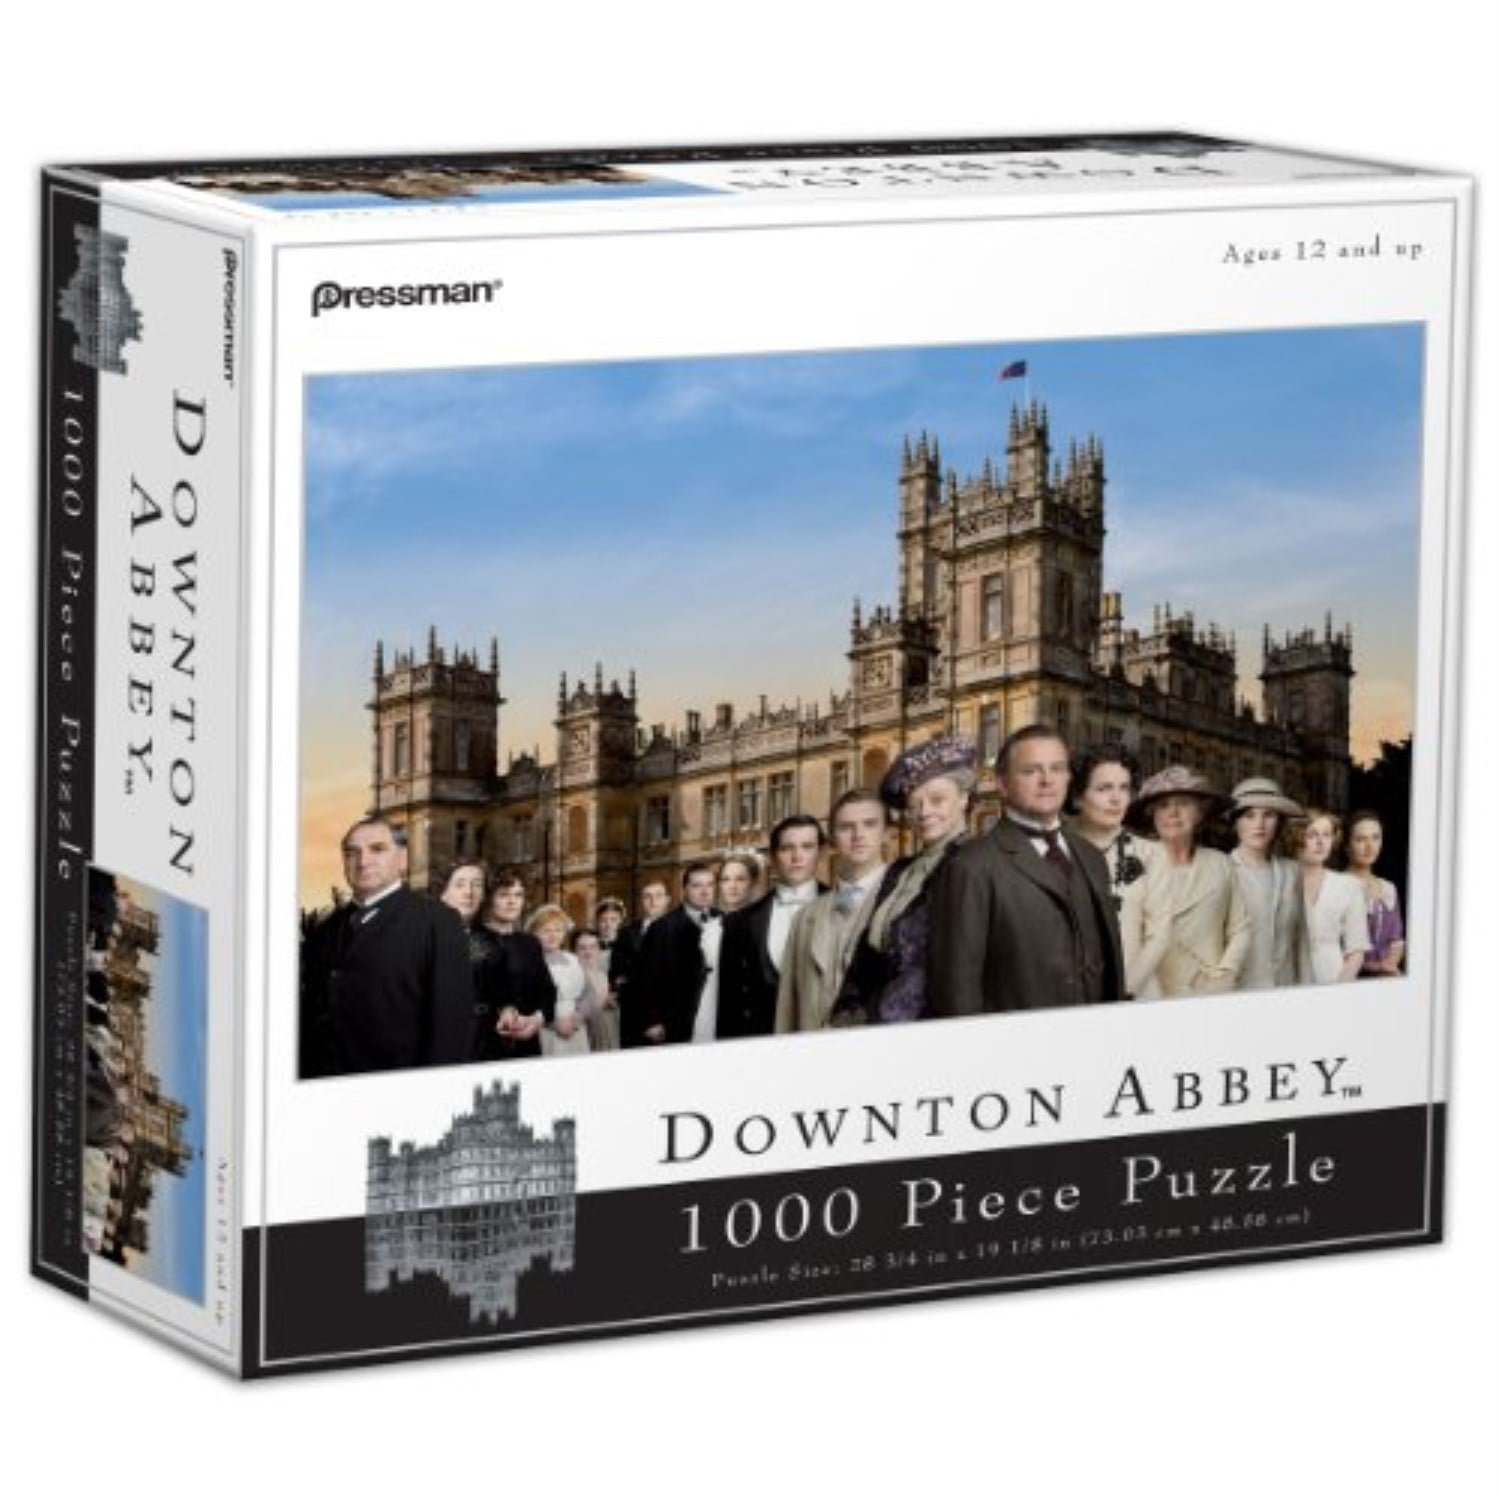 Downton Abbey 1000-Piece Puzzle - Family and Staff - Walmart.com ...